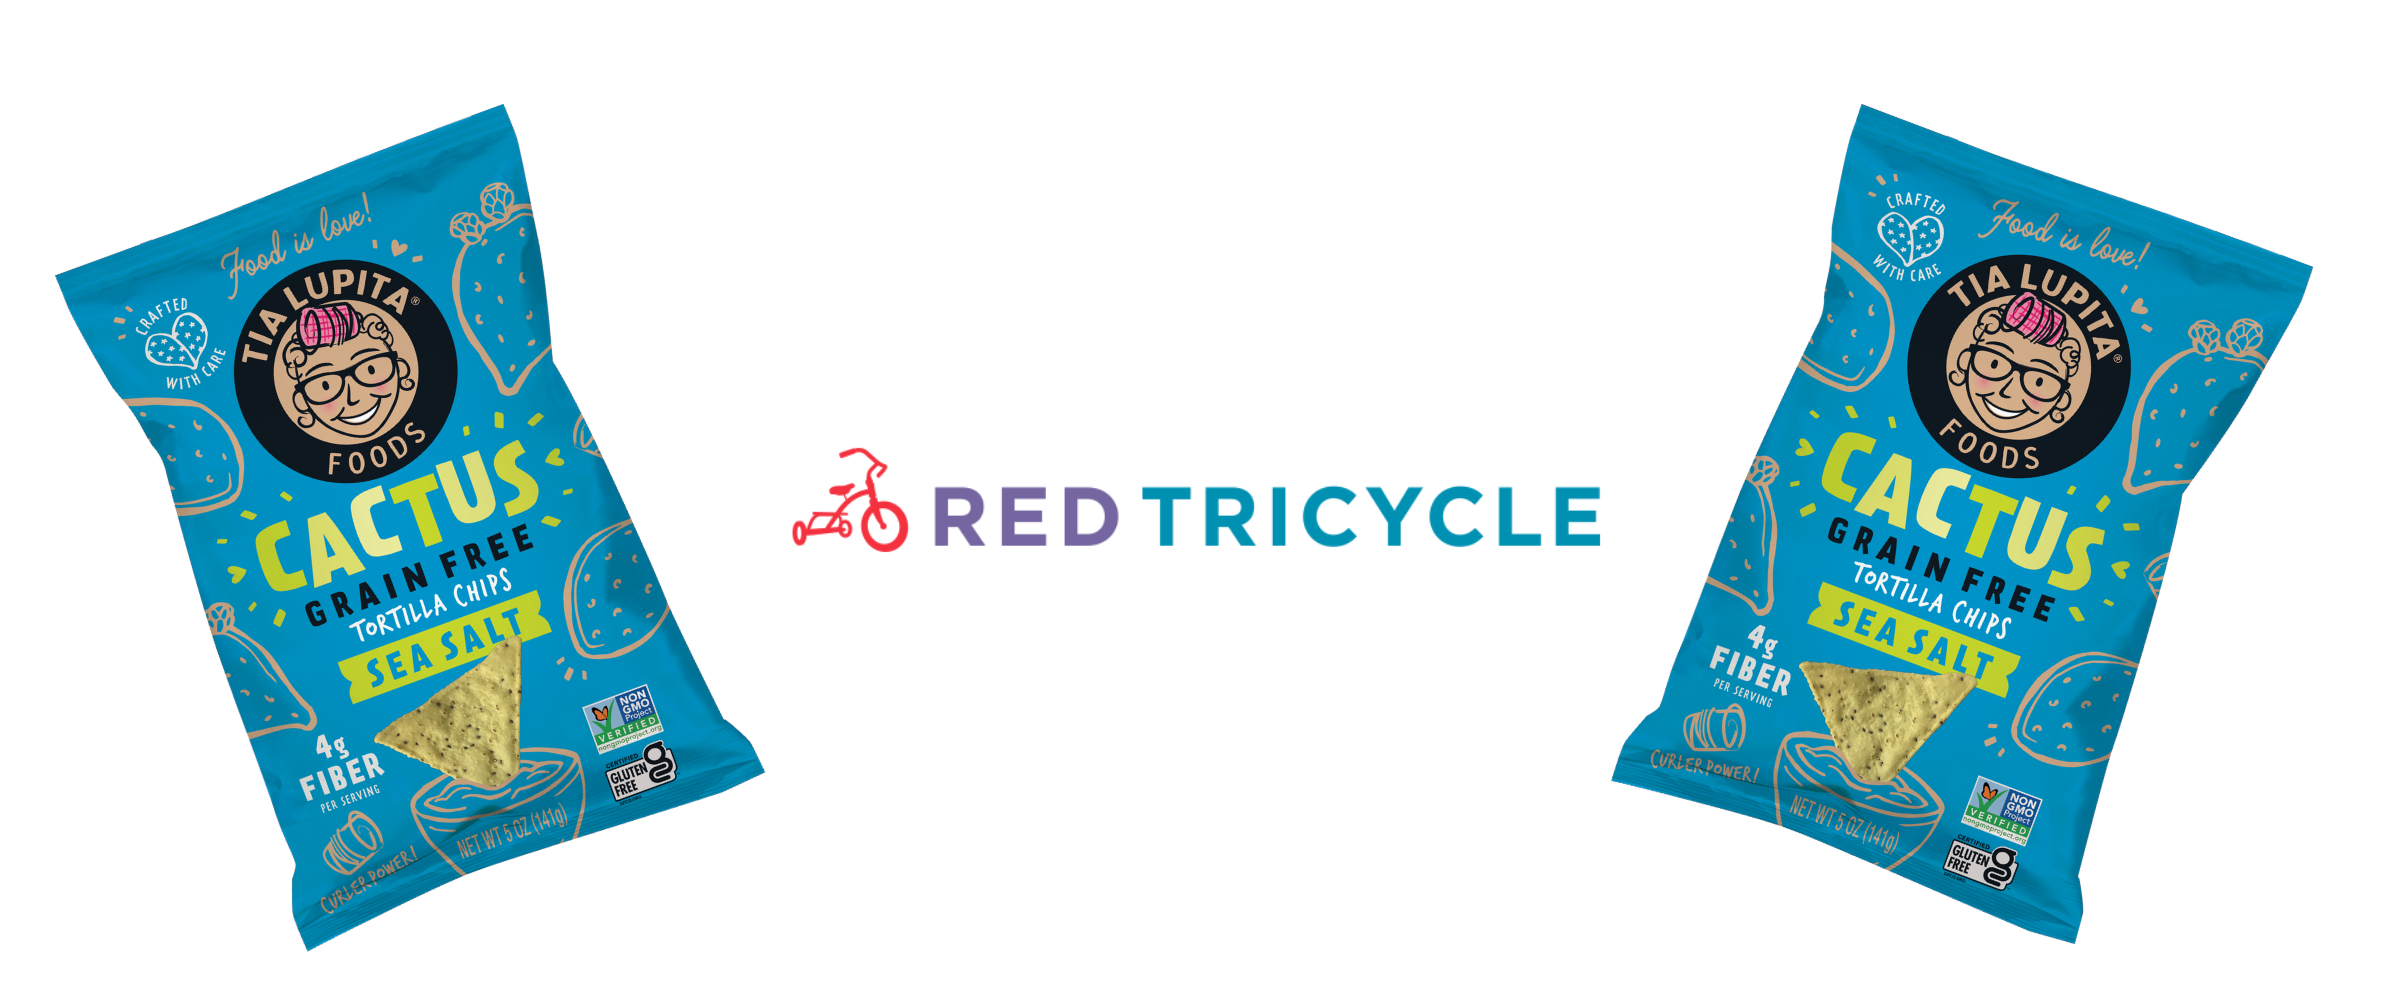 Red Tricycle Features Tia Lupita